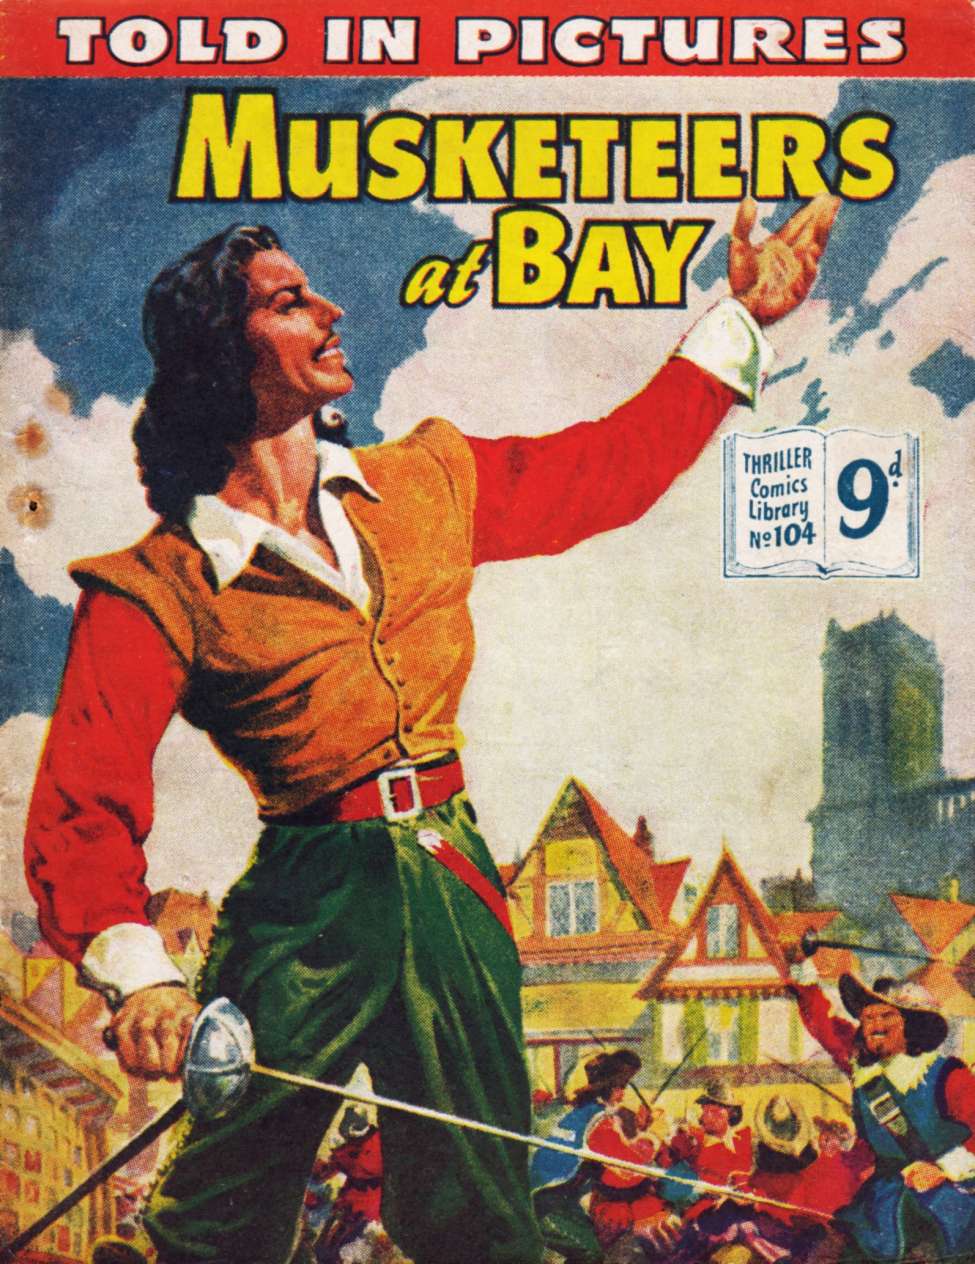 Book Cover For Thriller Comics Library 104 - Musketeers at Bay